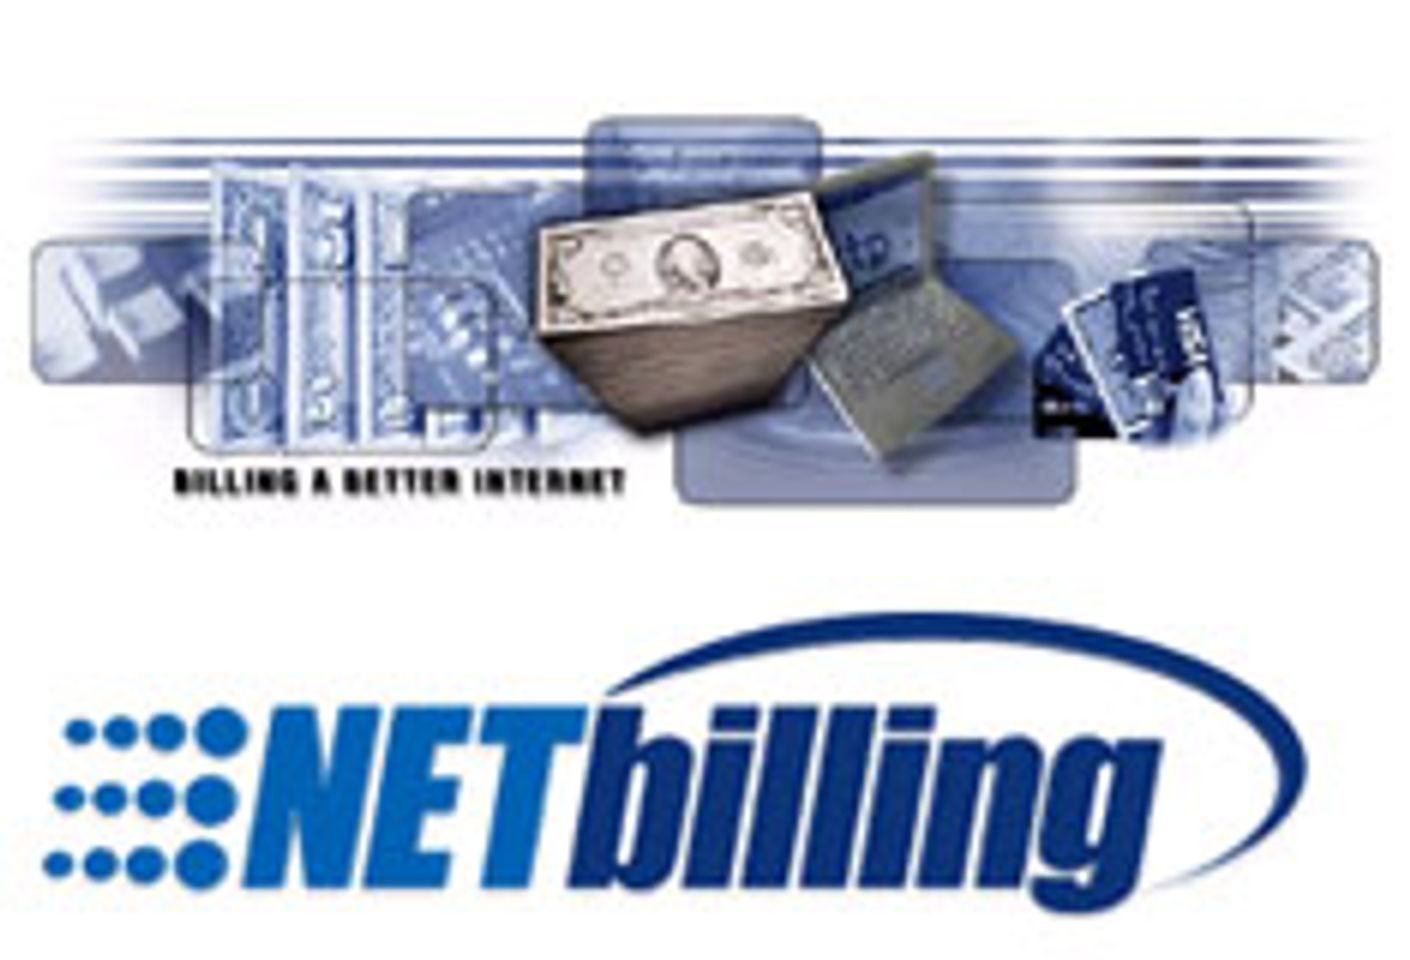 Netbilling Adds Features, Functionality - AVN